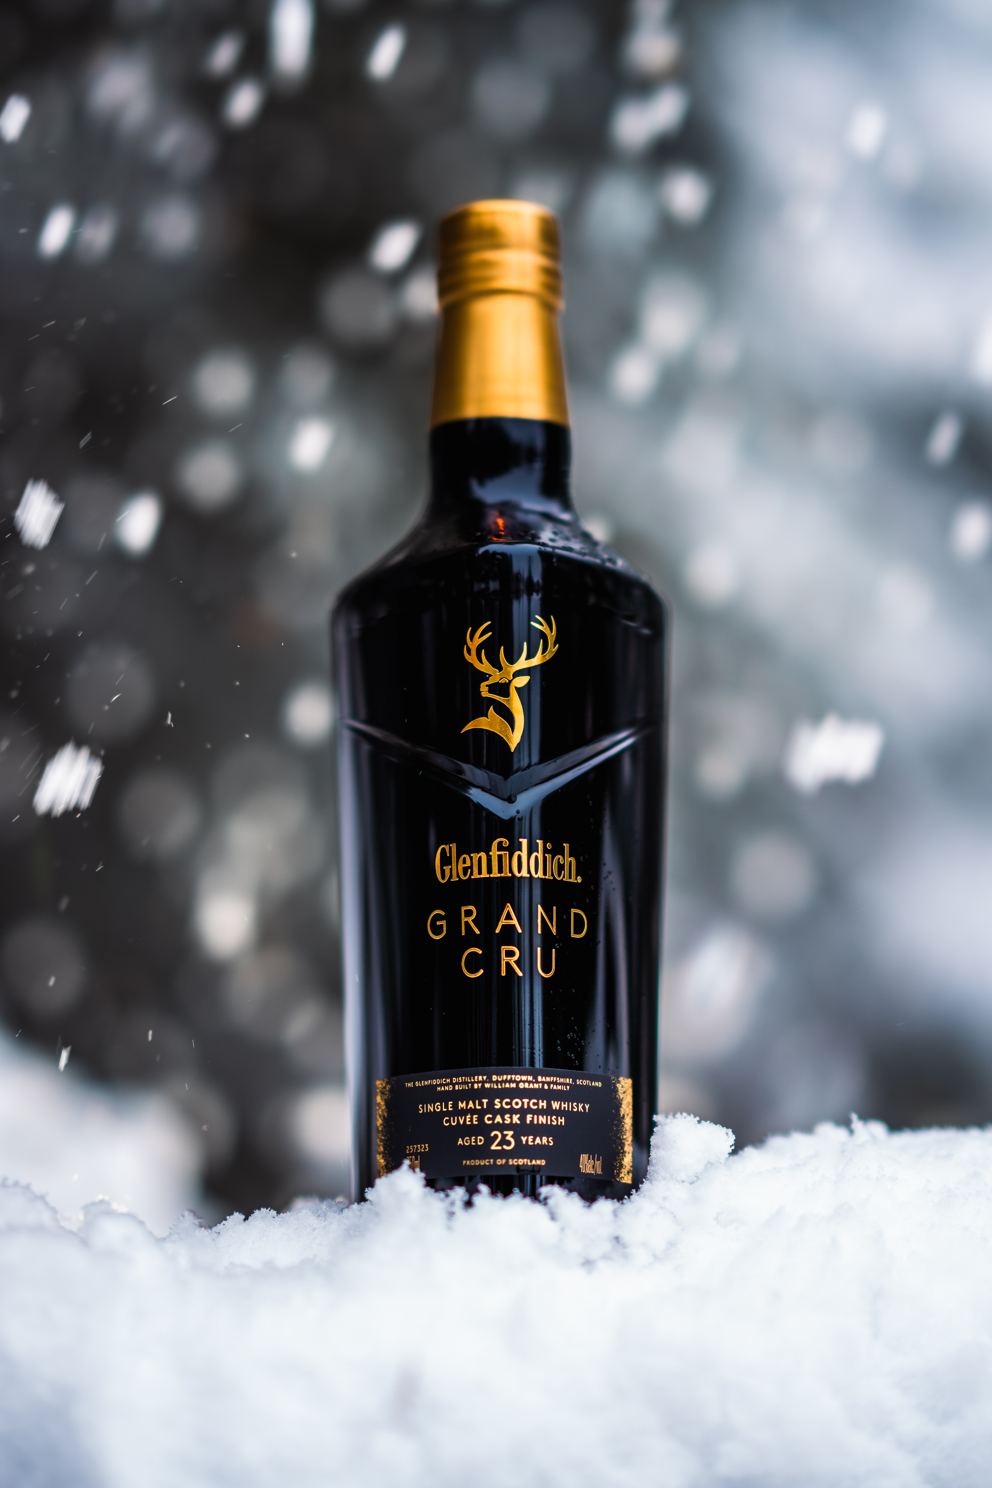 GLENFIDDICH, THE WORLD’S MOST AWARDED SINGLE MALT, LAUNCHES IN CANADA, GLENFIDDICH GRAND CRU 23 YEAR OLD, JUST IN TIME FOR CELEBRATING THIS HOLIDAY SEASON!